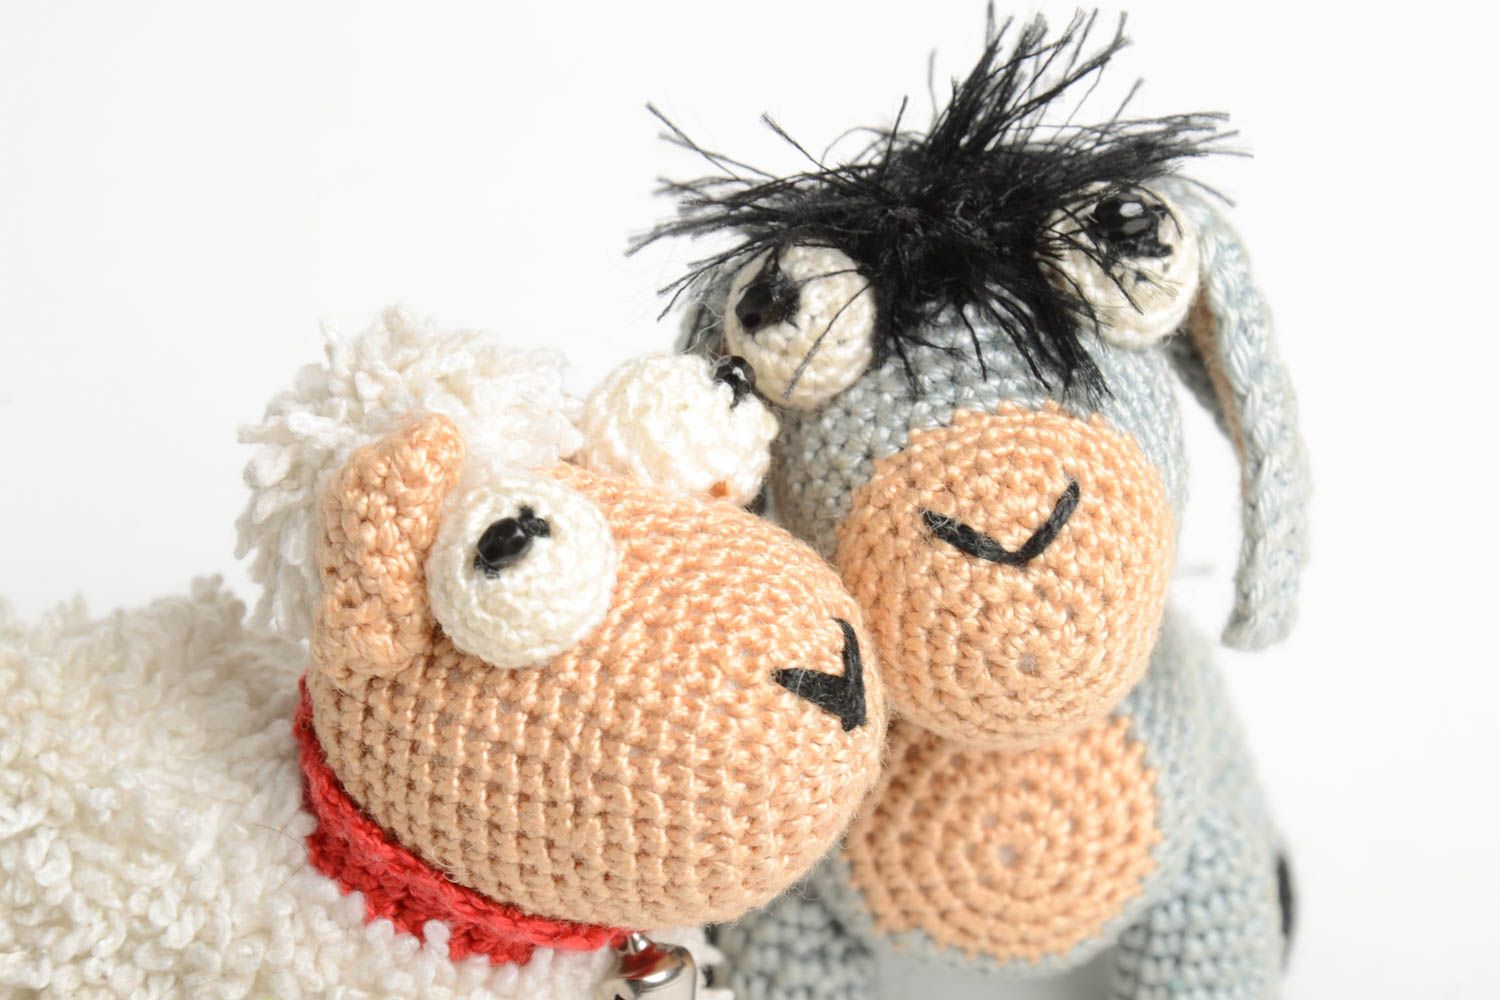 Handmade toy set of 2 items decor ideas gift for baby crocheted toy animal toy photo 3